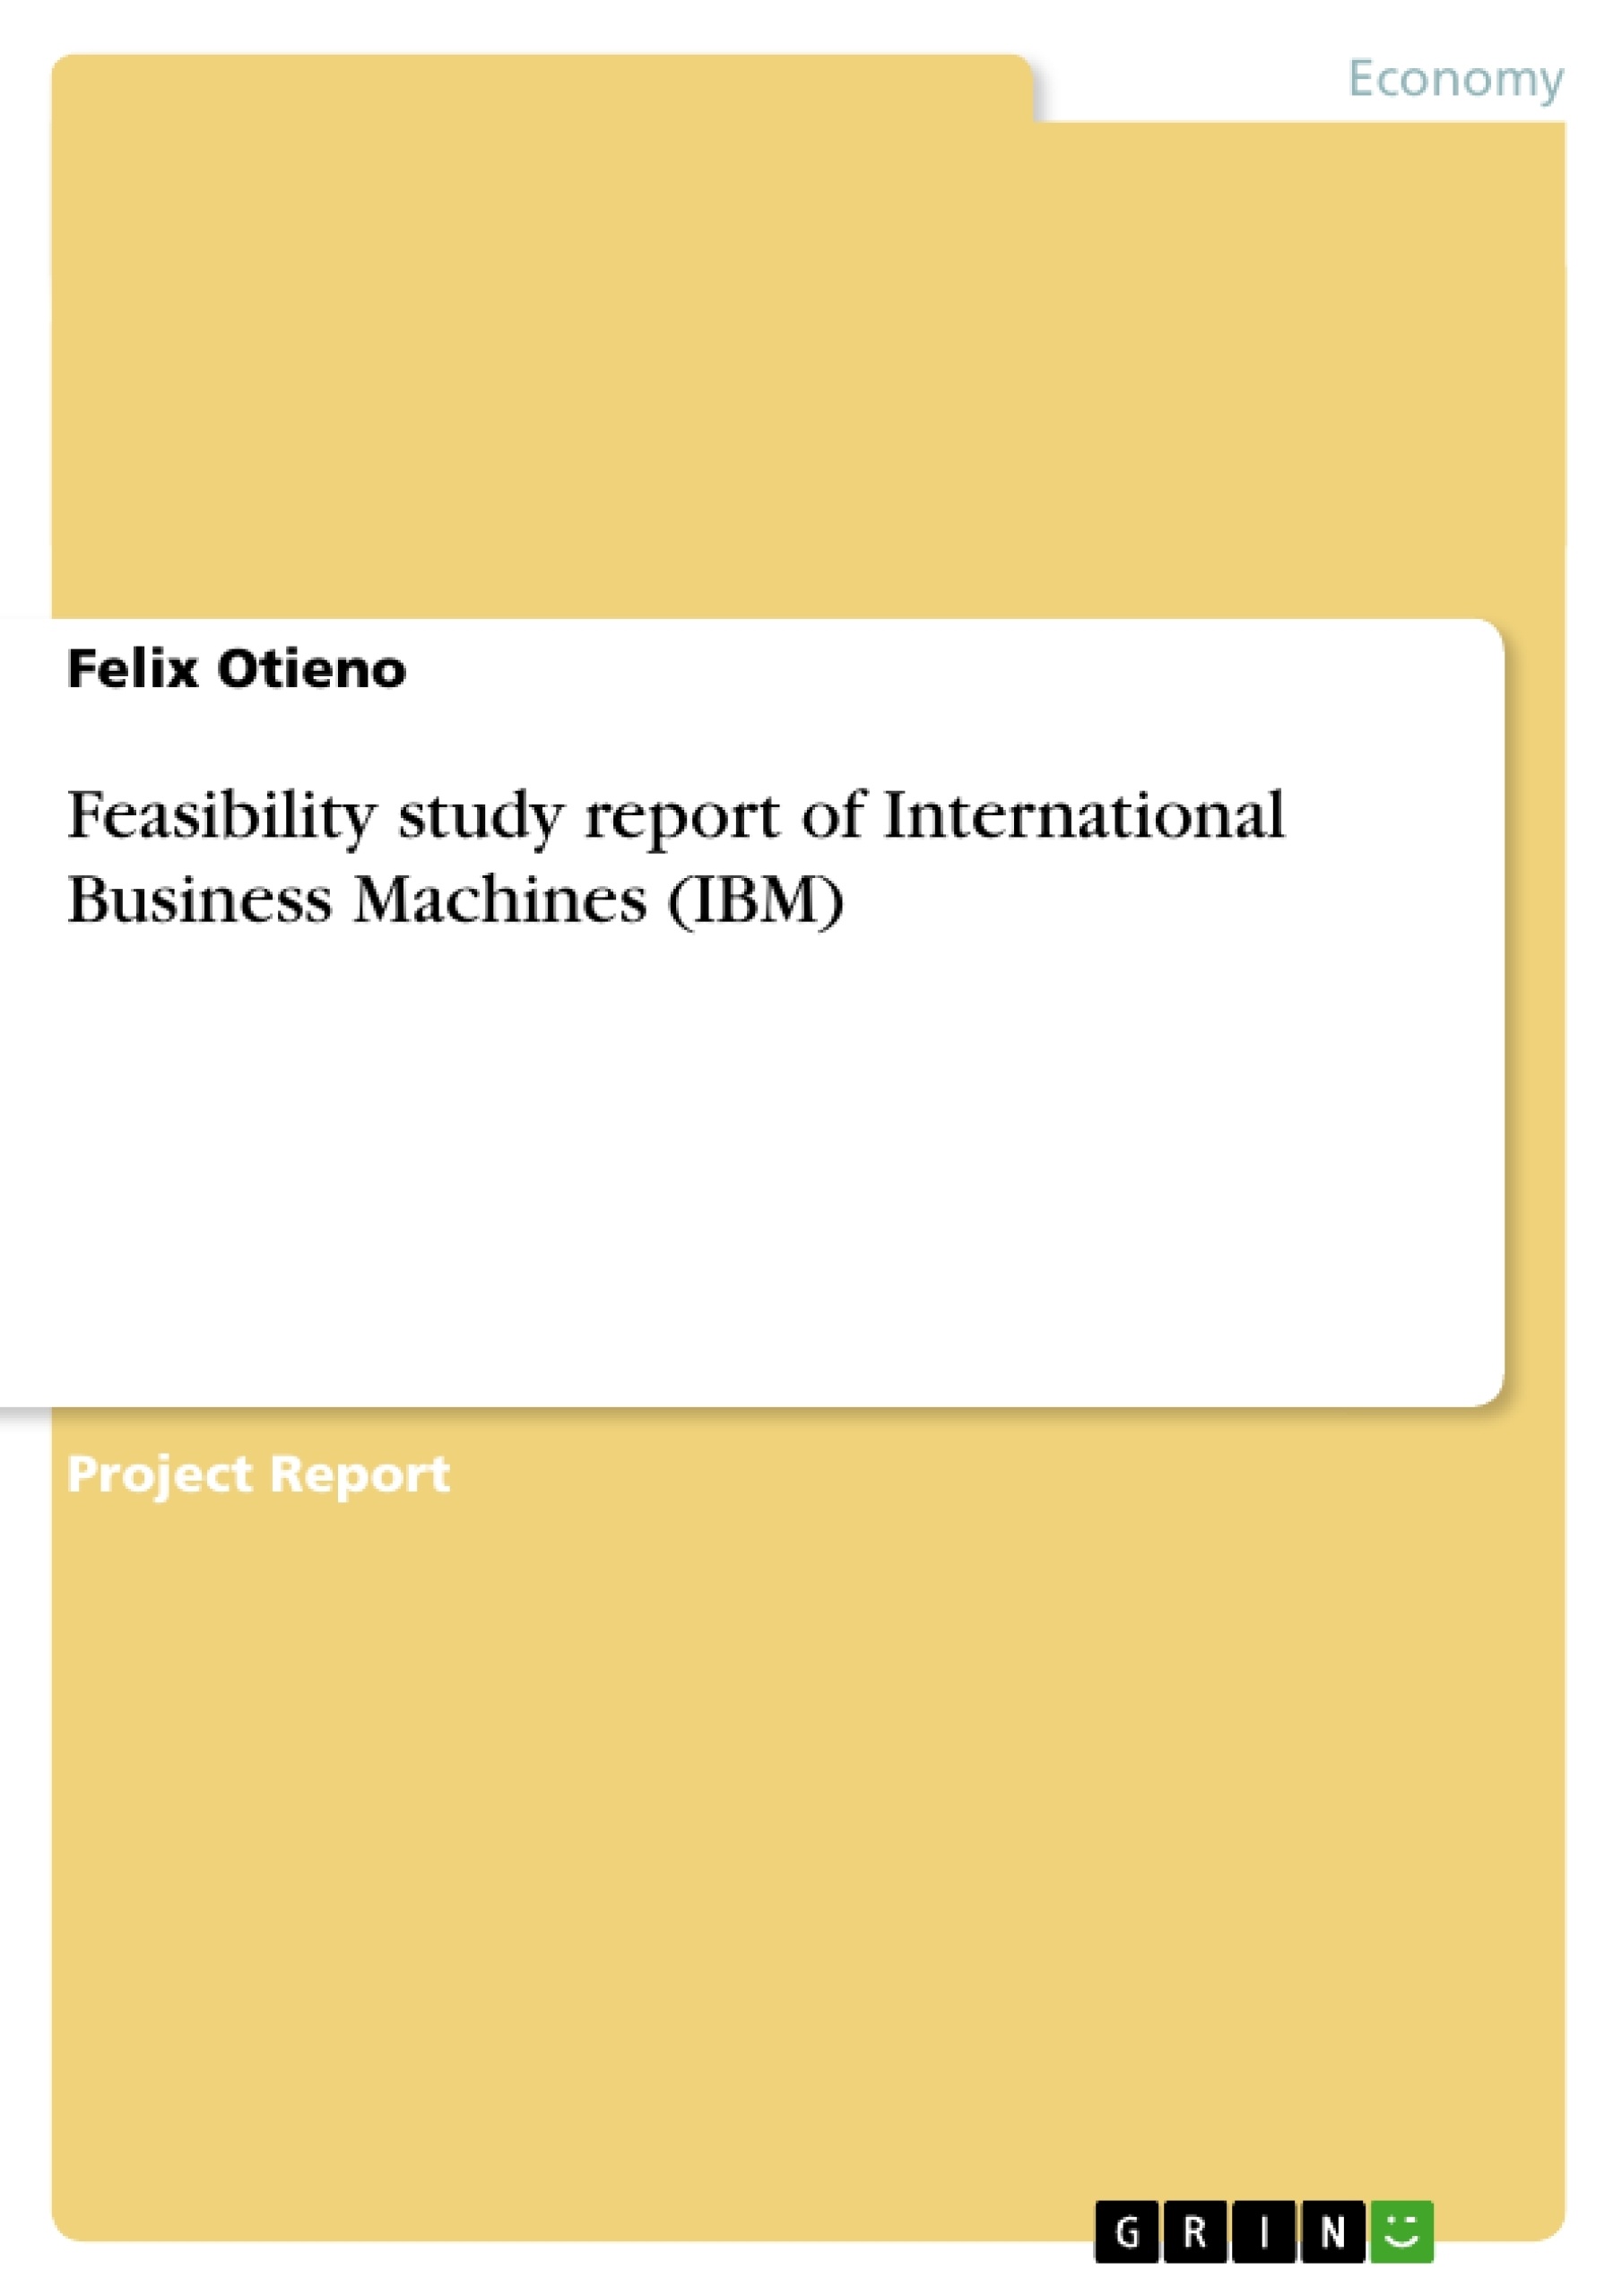 Title: Feasibility study report of International Business Machines (IBM)